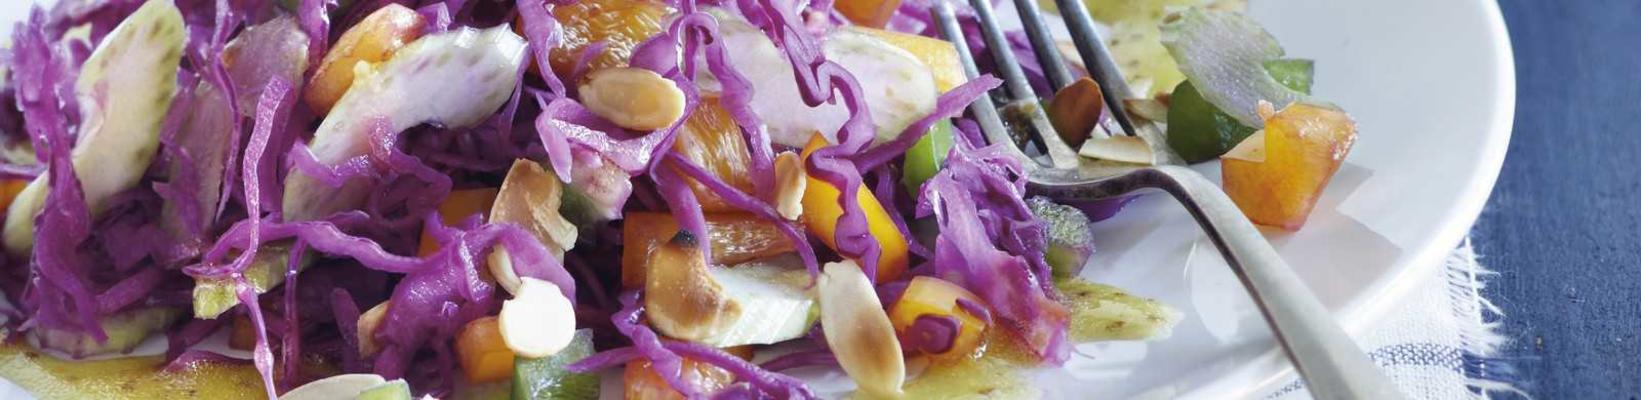 red cabbage salad with warm garlic dressing